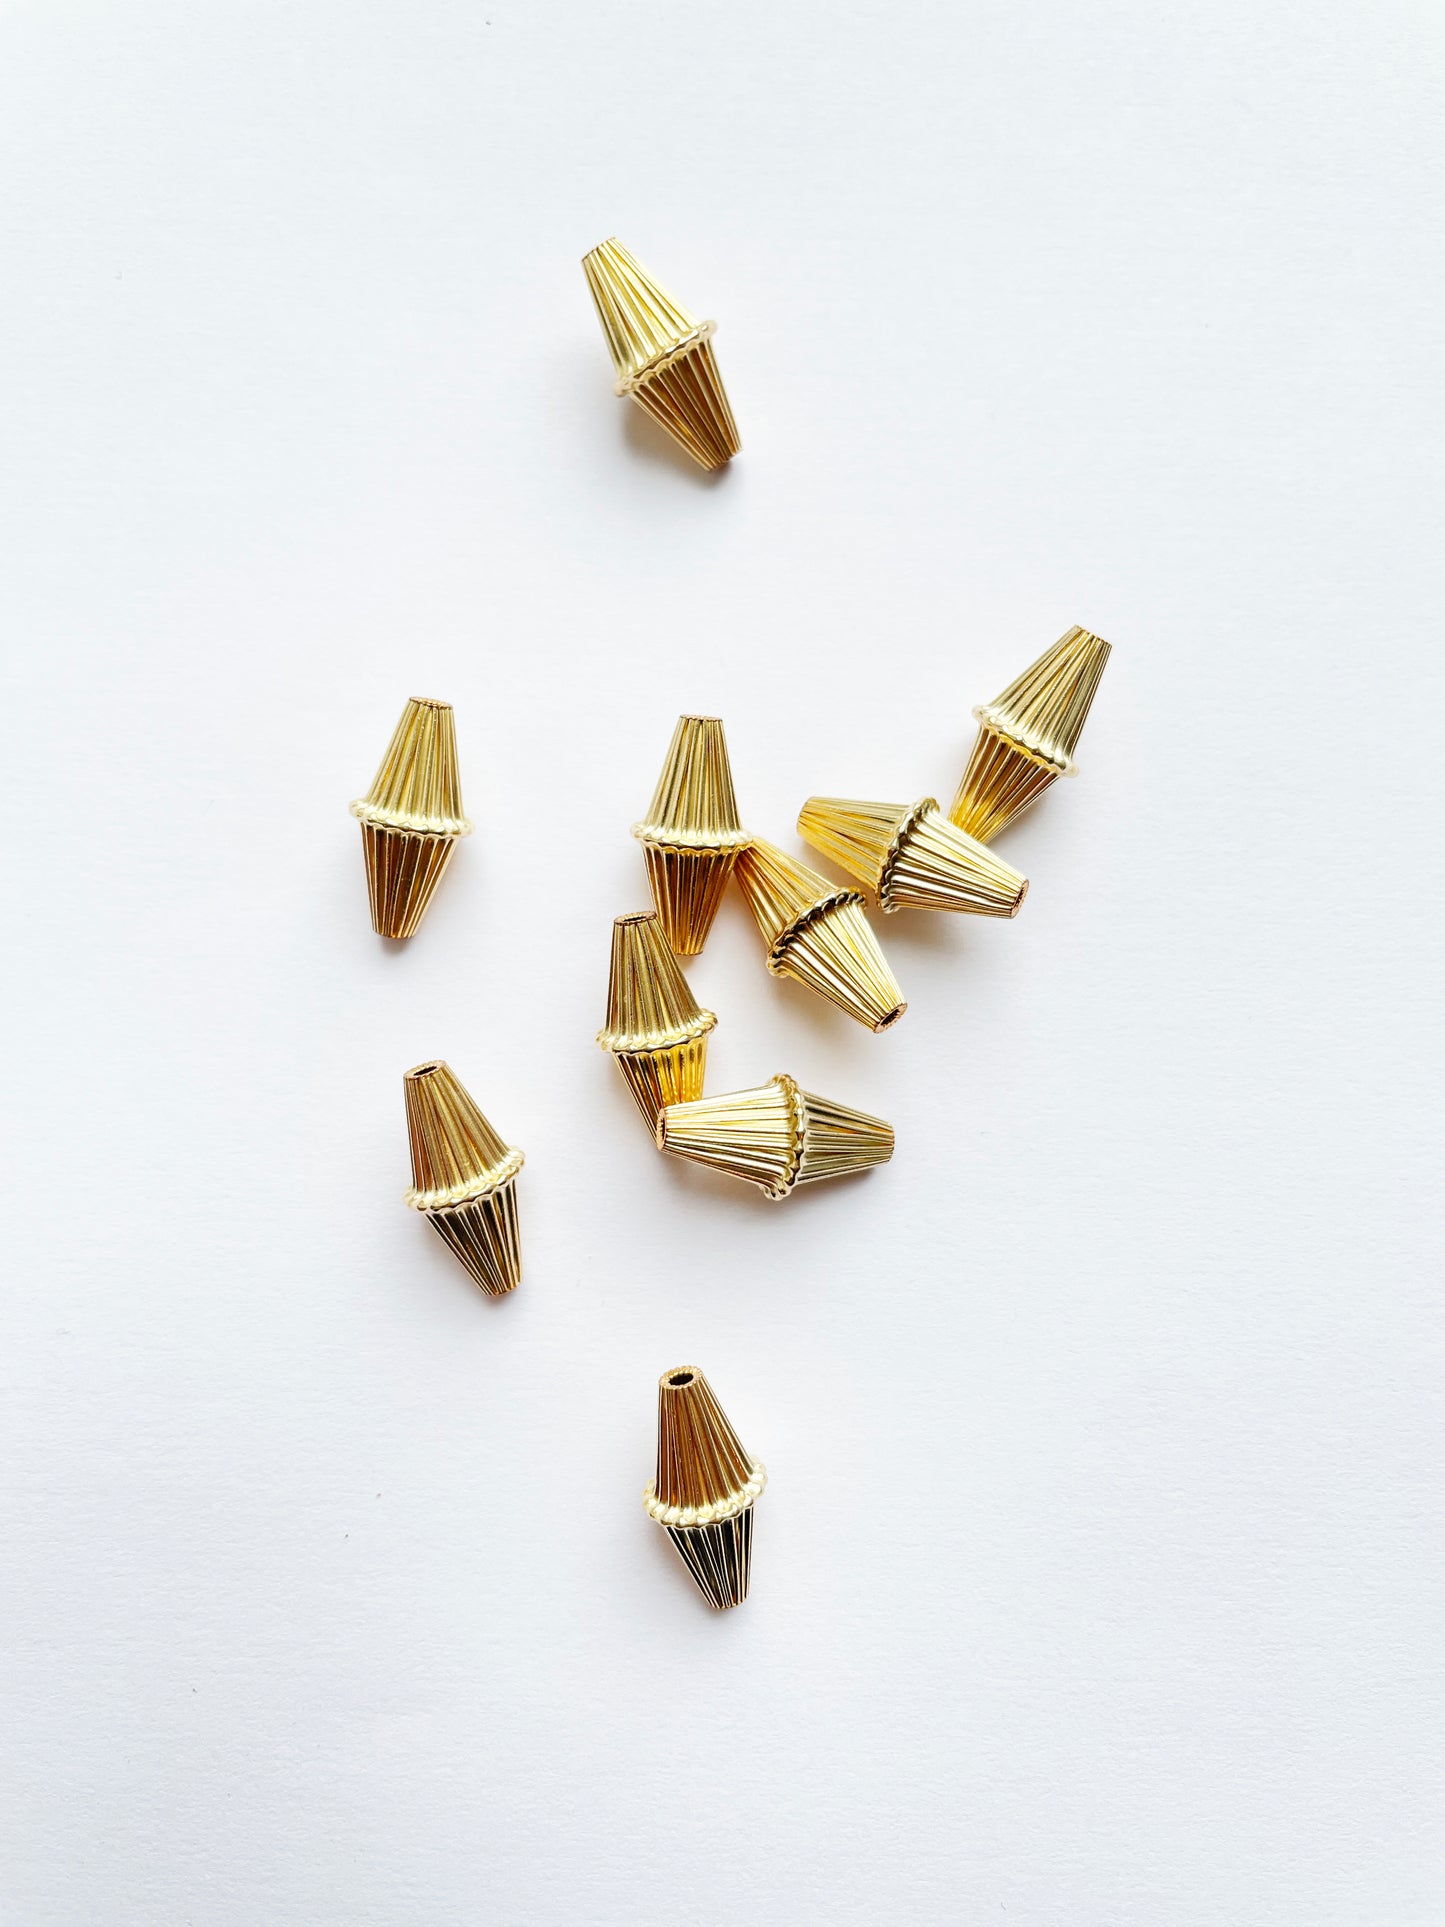 Two beads- 14K Gold-filled Corrugated Large Bicone Beads